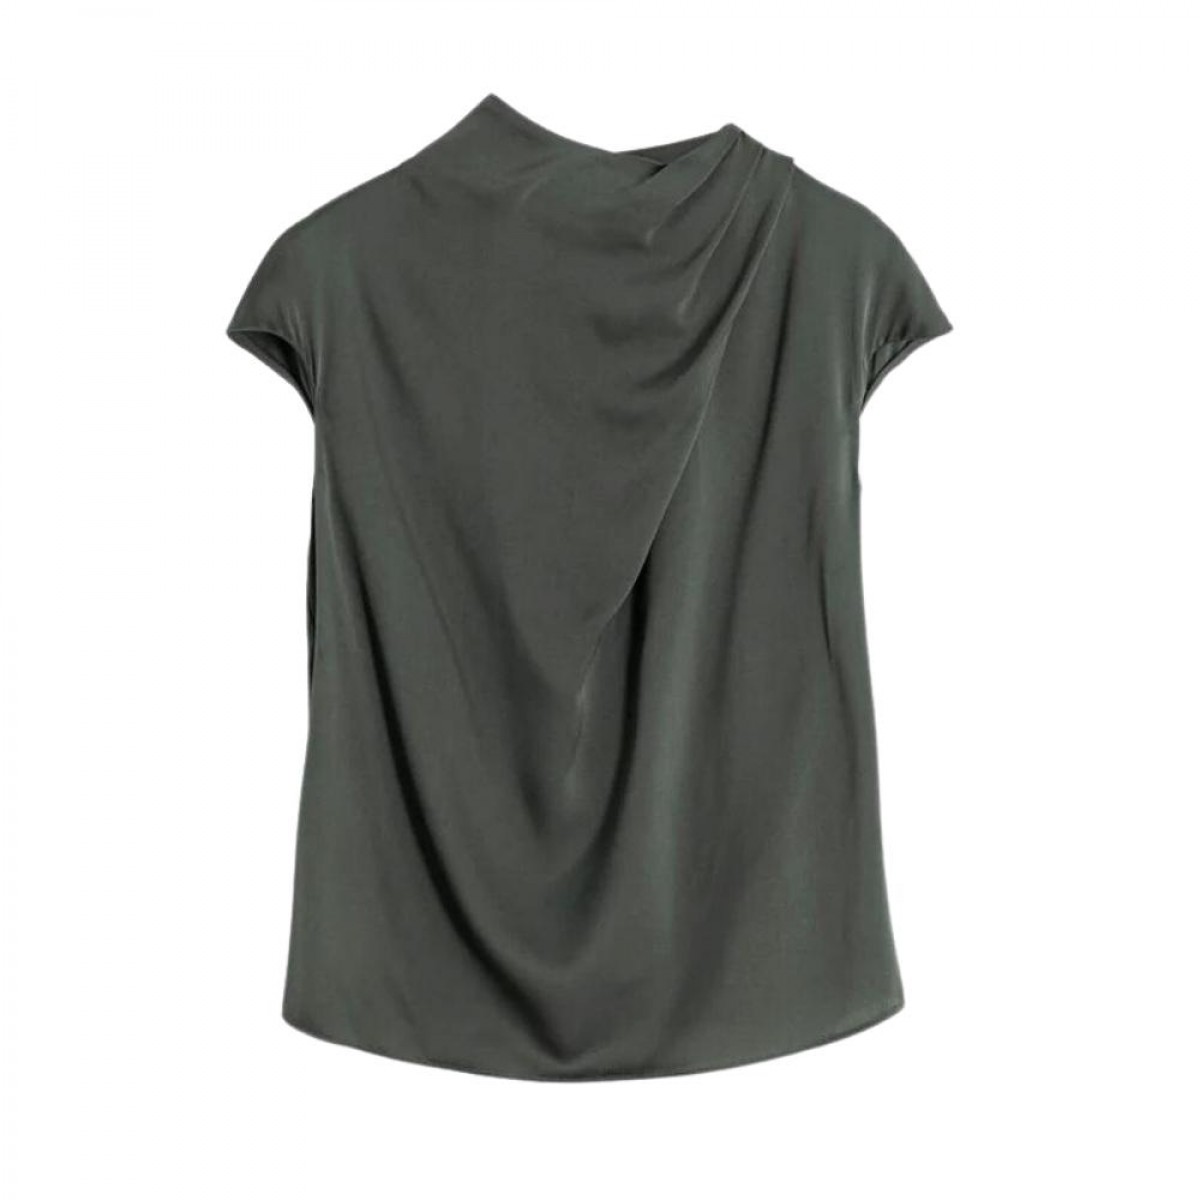 lima top - military green - front